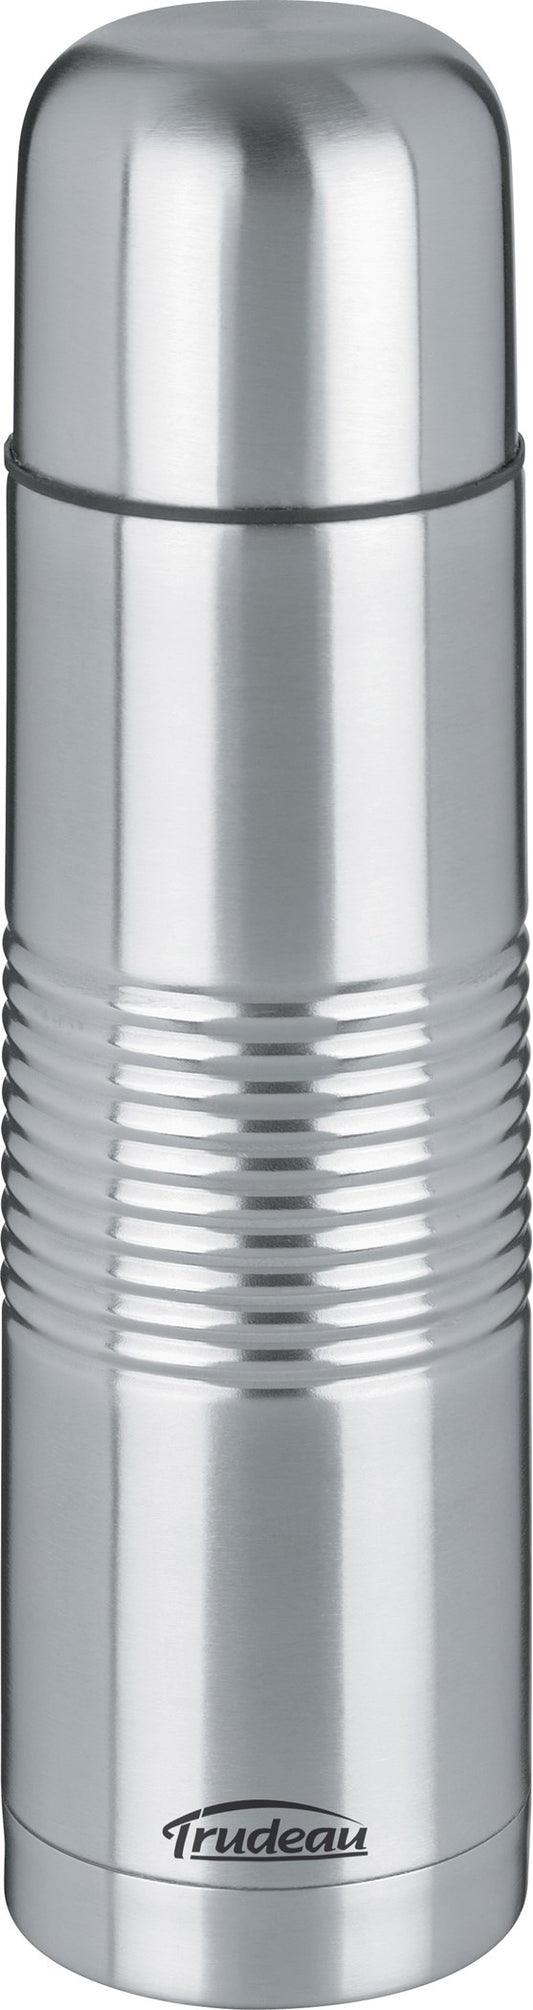 Trudeau 04715600 16 Oz Stainless Steel Vacuum Insulated Bottle